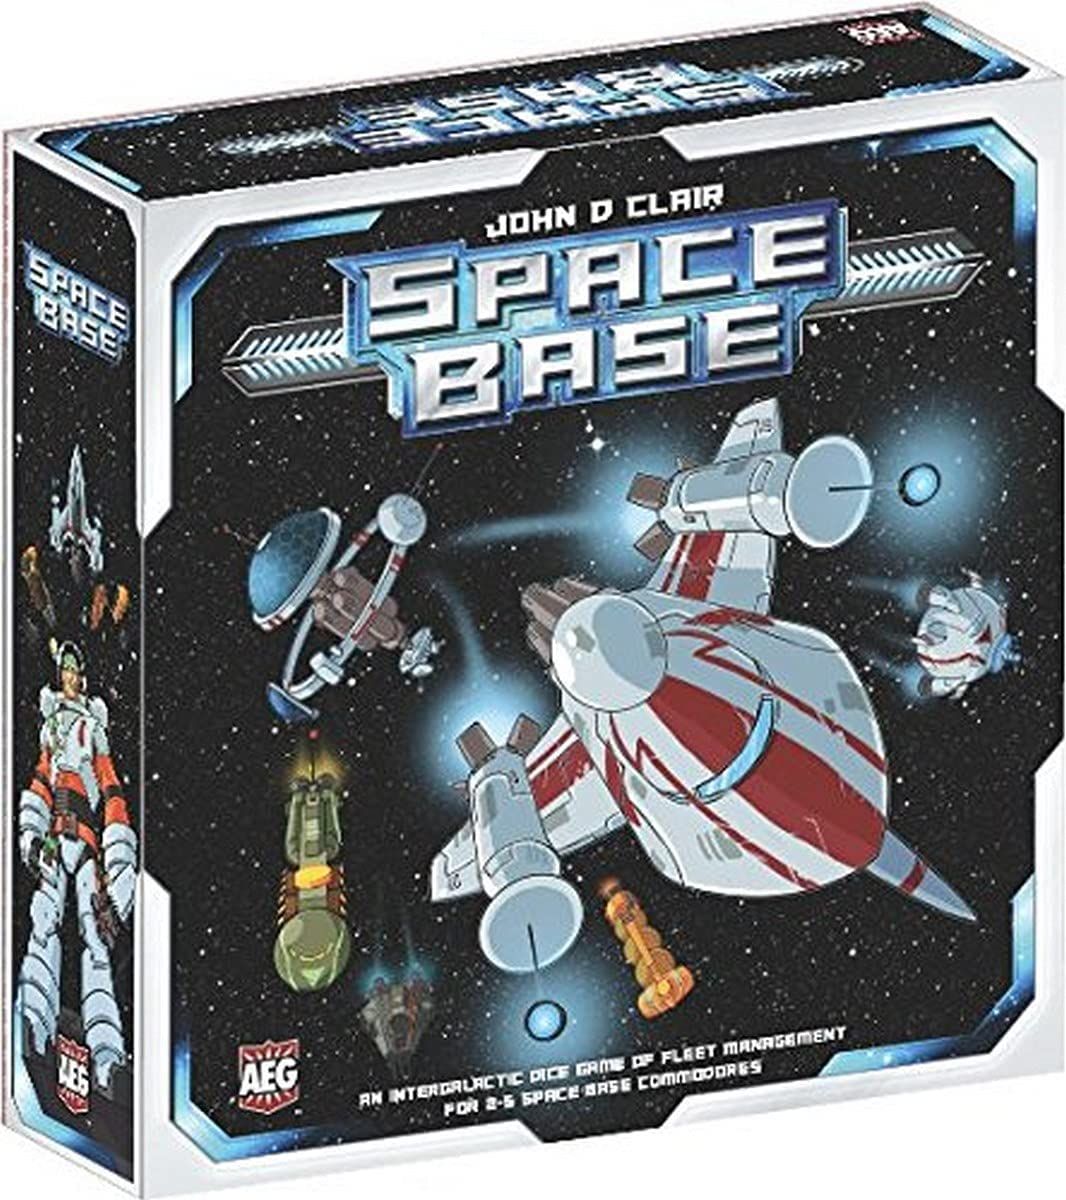 The box of the board game Space Base